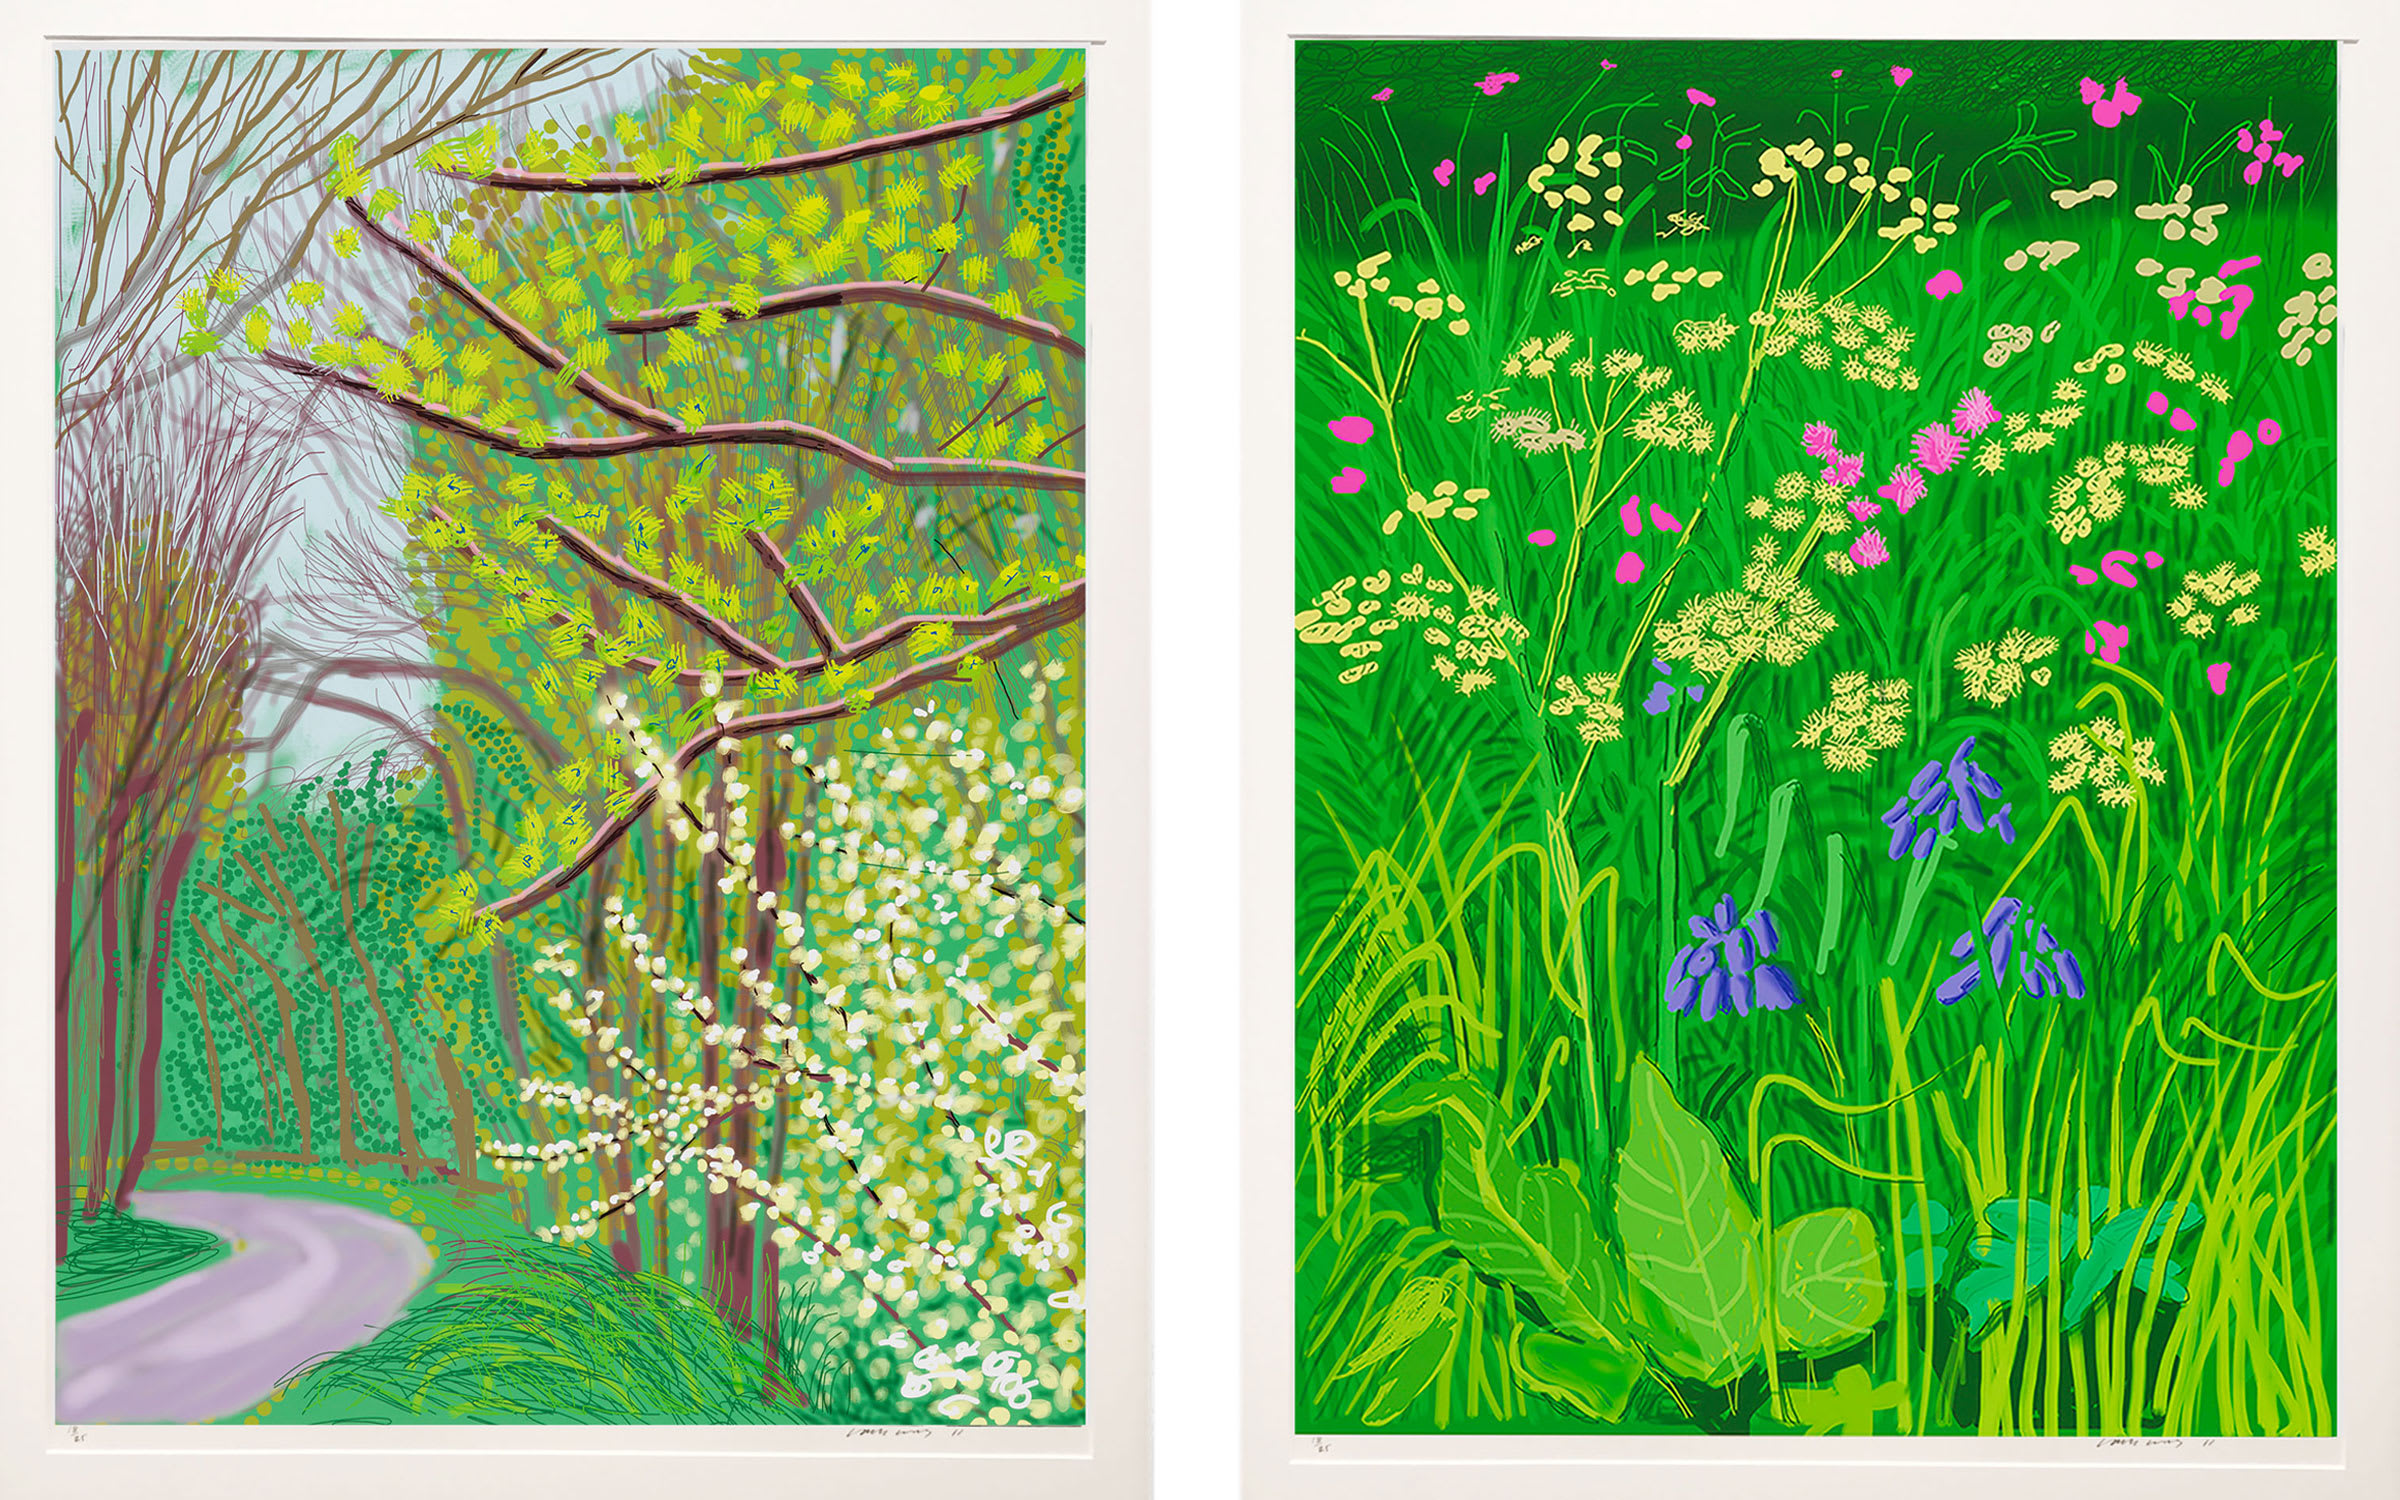 Left: David Hockney, The Arrival of Spring in Woldgate, East Yorkshire in 2011, 17 May, 2011. Right: The Arrival of Spring in Woldgate, East Yorkshire in 2011 (twenty eleven) - 30 May, 2011. Courtesy Annely Juda Fine Art, London.